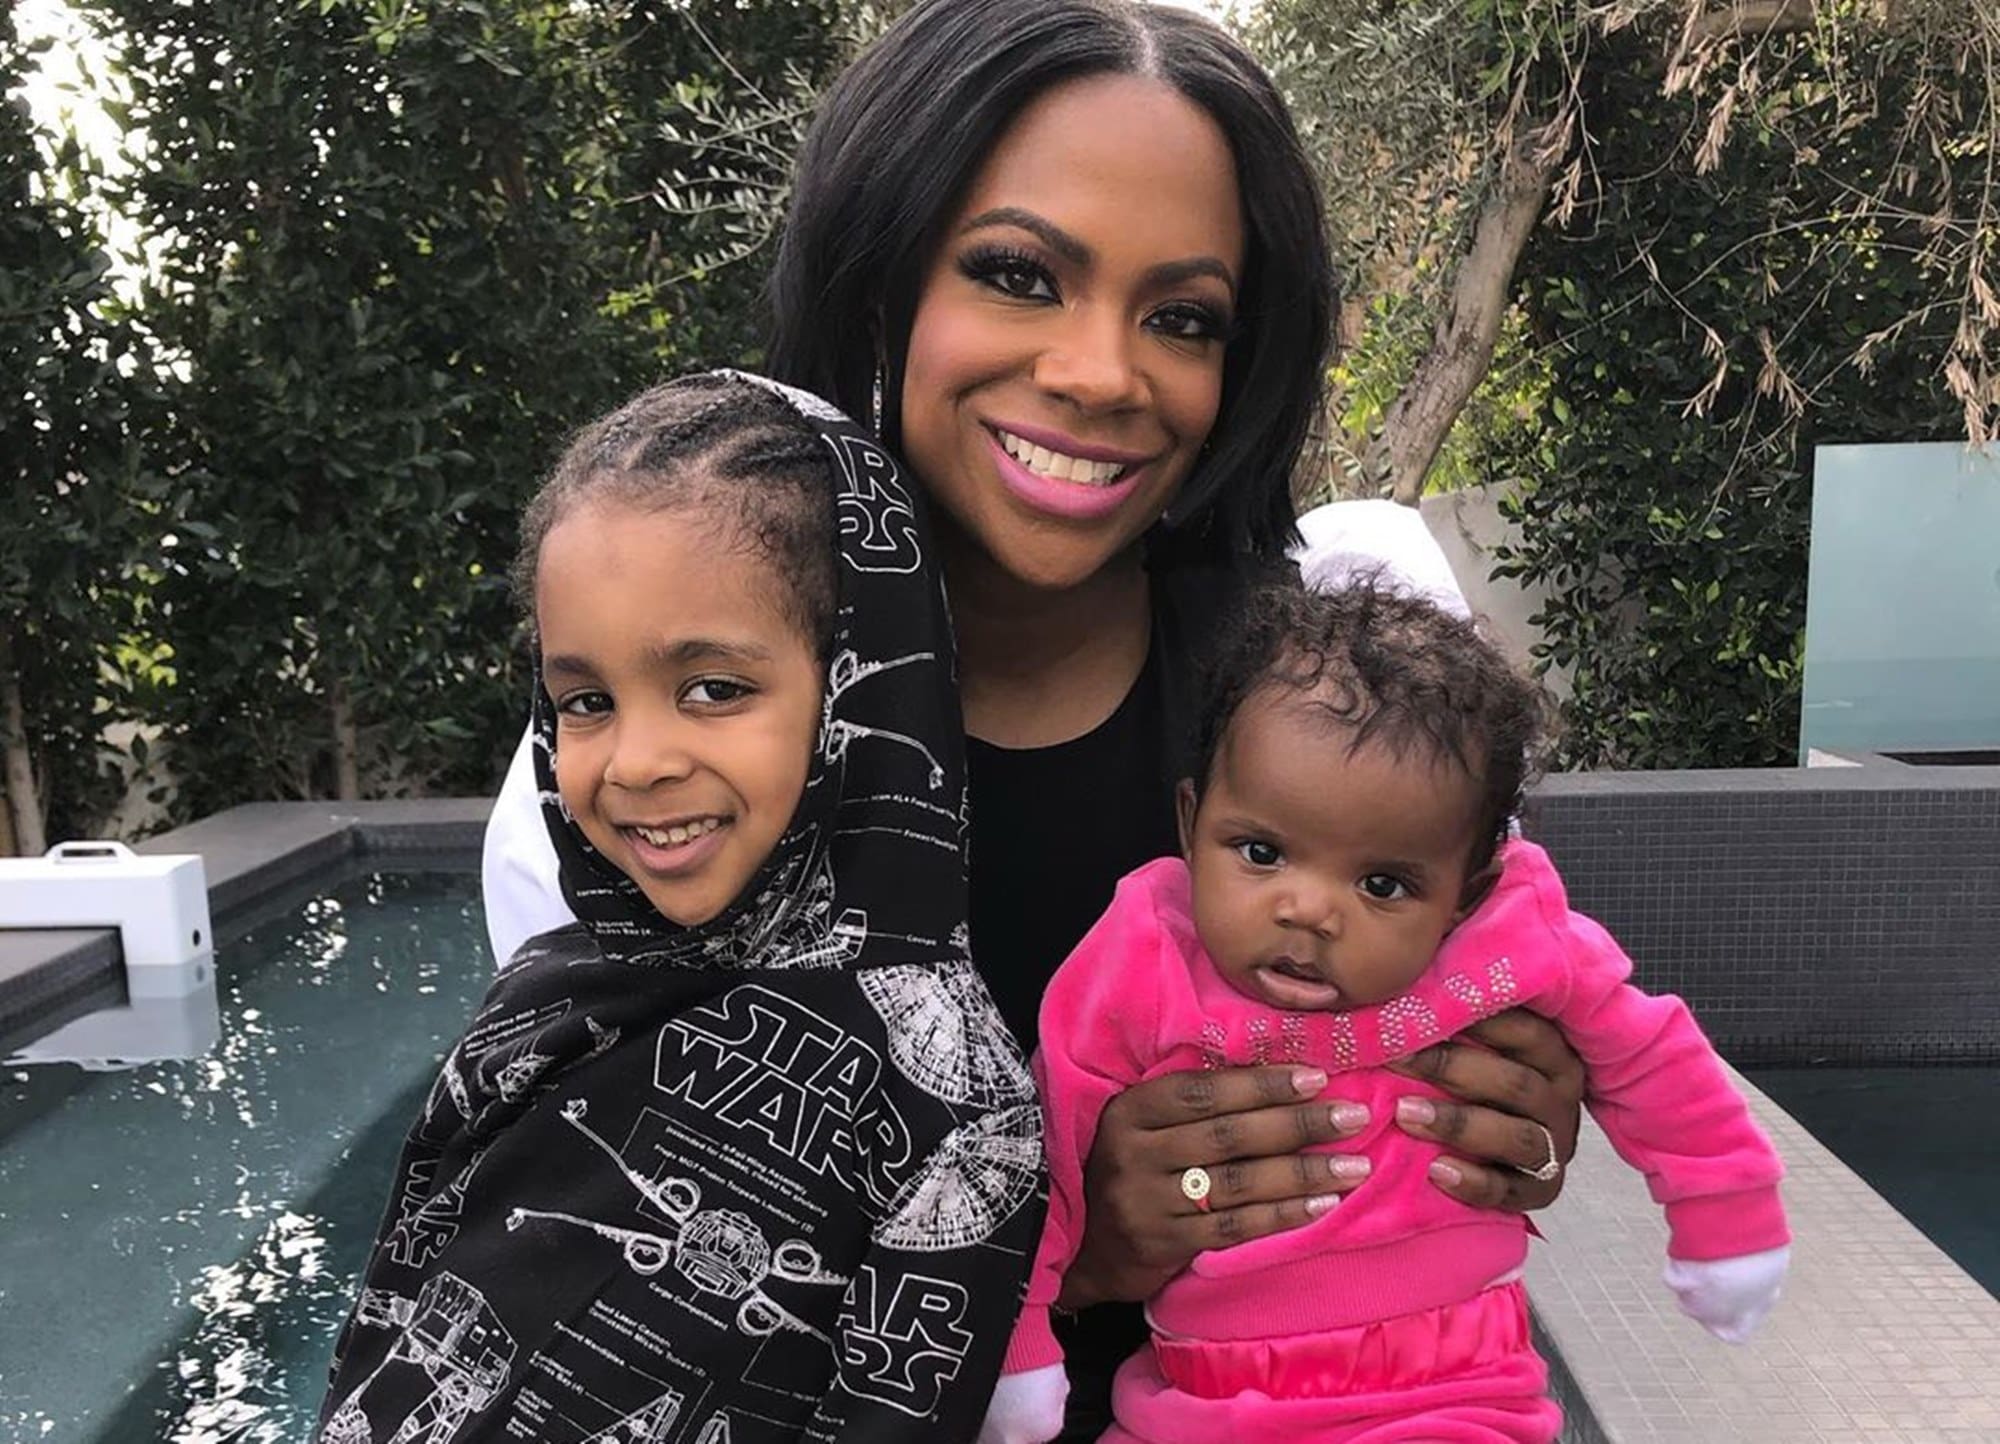 Kandi Burruss' Video With Baby Blaze Tucker Has Fans Saying That Todd Tucker In The Sweetie Pie's Twin - Check Out The Clip And See For Yourselves